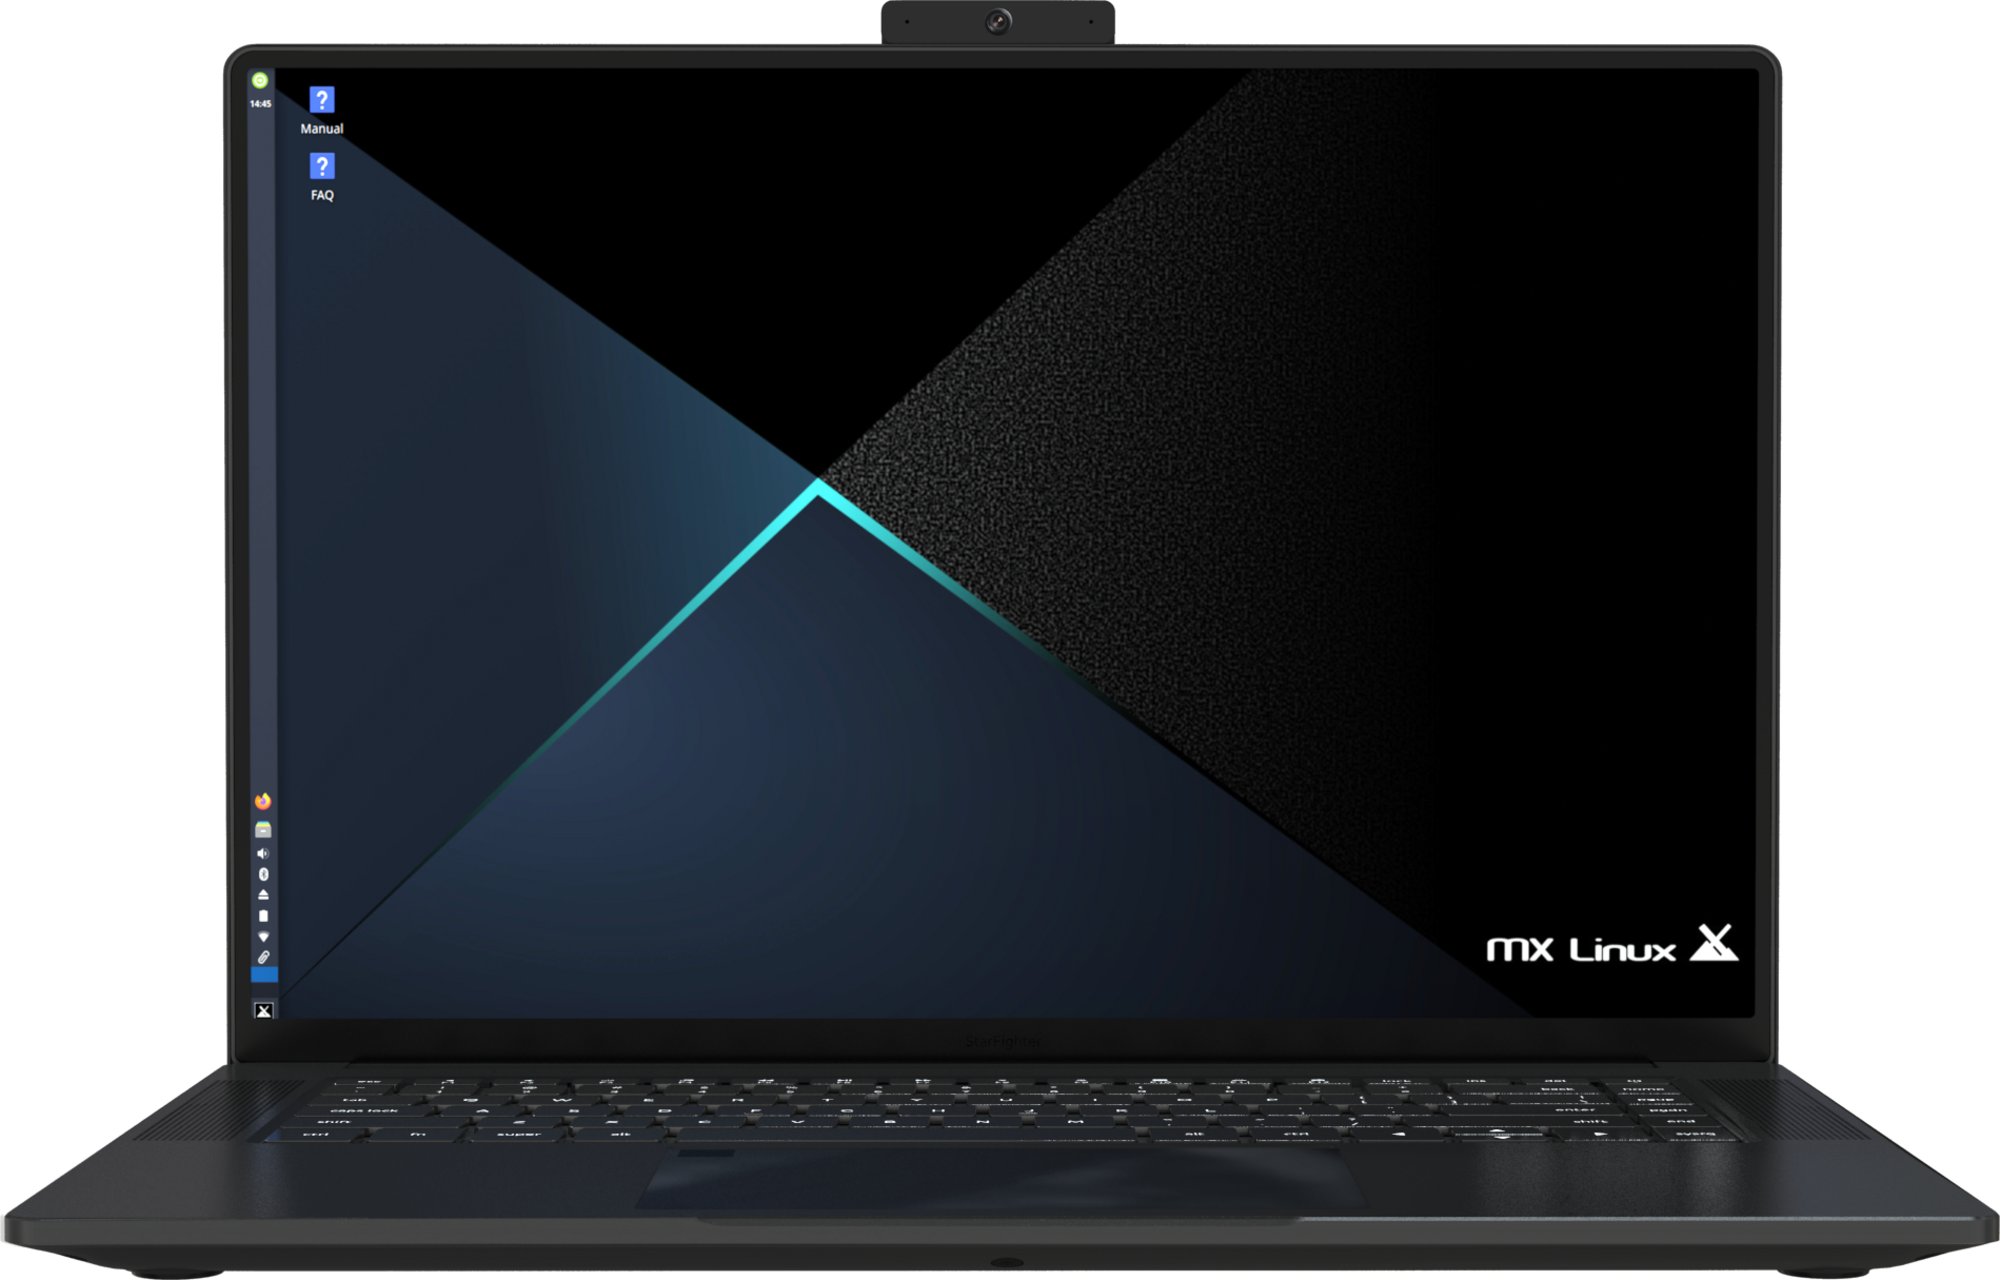 Laptop with pre-installed MX Linux